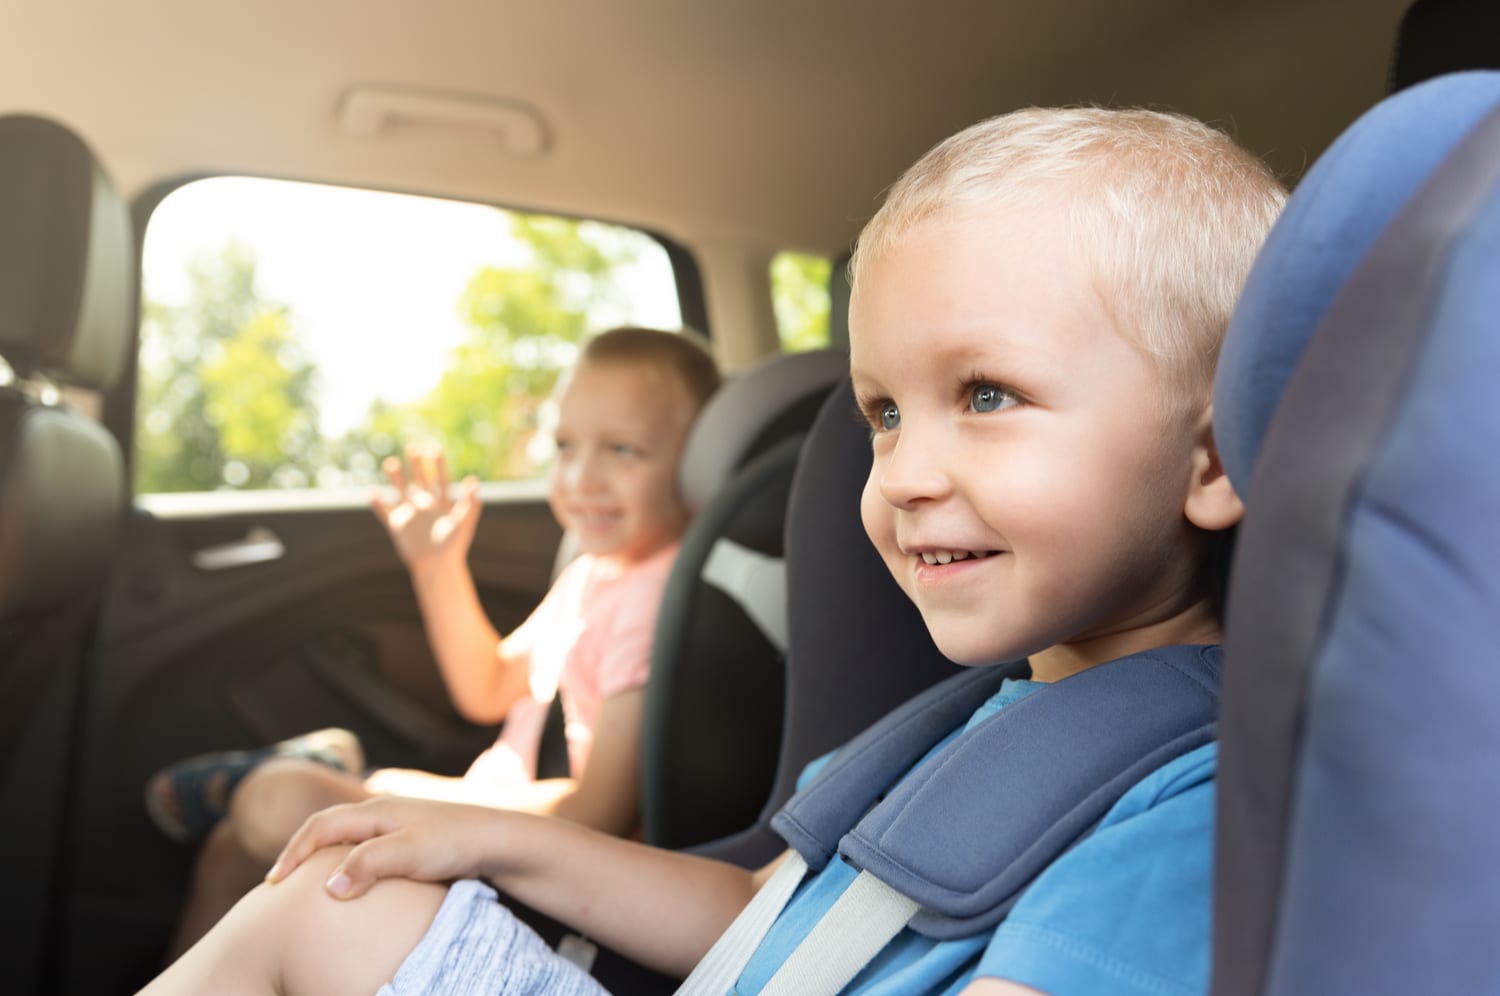 Child’s Car Accident Claims are Different in These 4 Ways